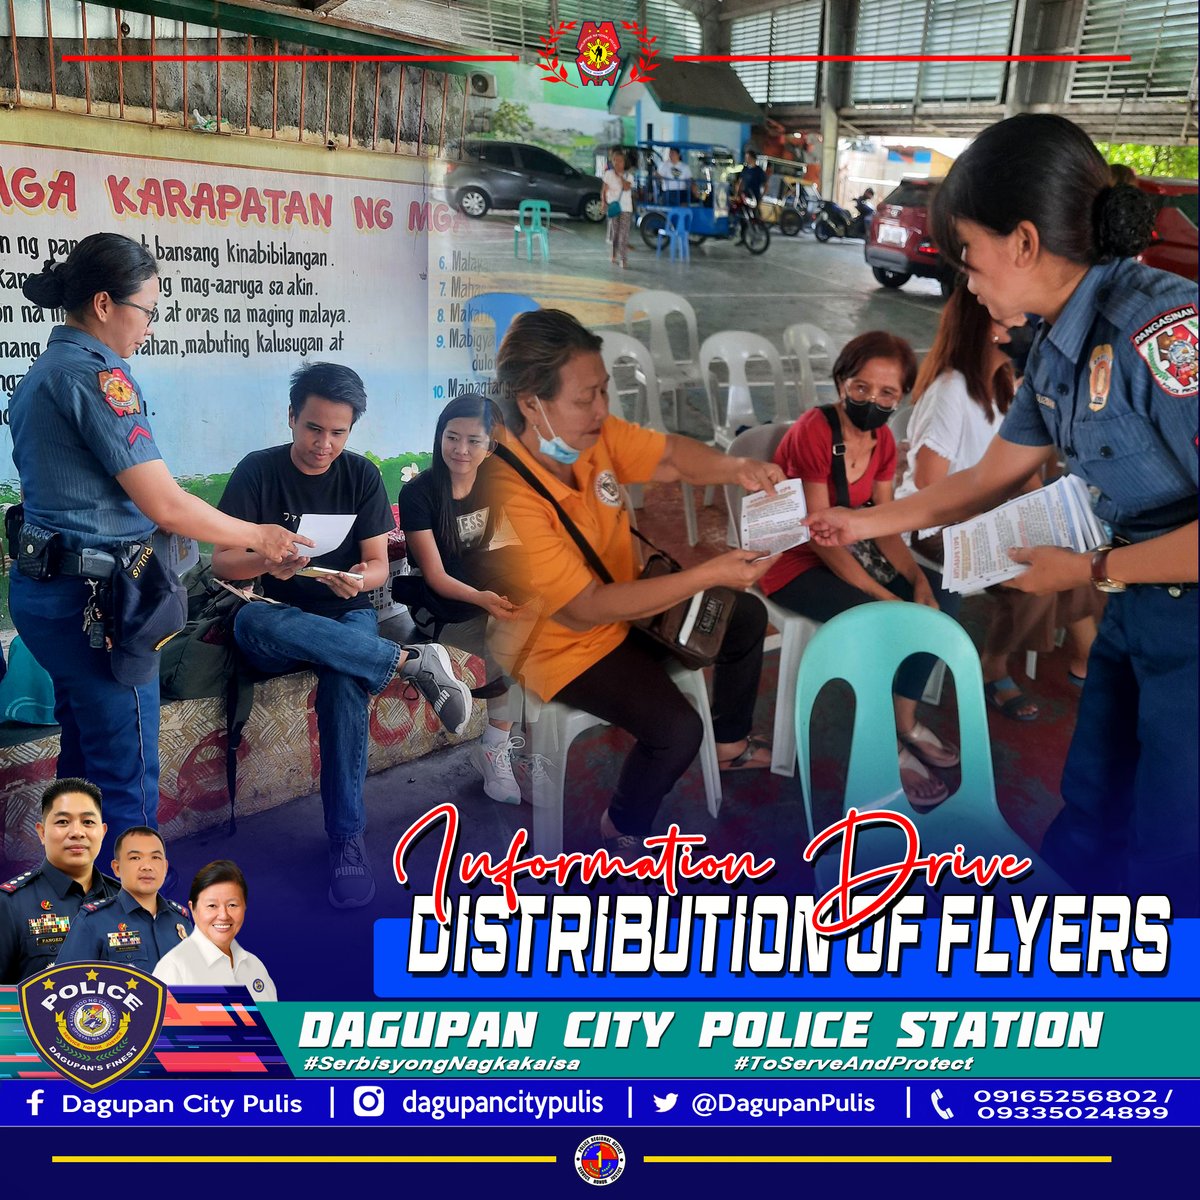 Dagupan City Police Station personnel, under the supervision of PLTCOL BRENDON B PALISOC, OIC, conducted distribution of fliers about Crime Prevention Safety Tips, RA 9262, RA 8353 with emergency Hotline Numbers of this station to the populace in Barangay Malued, Dagupan City.